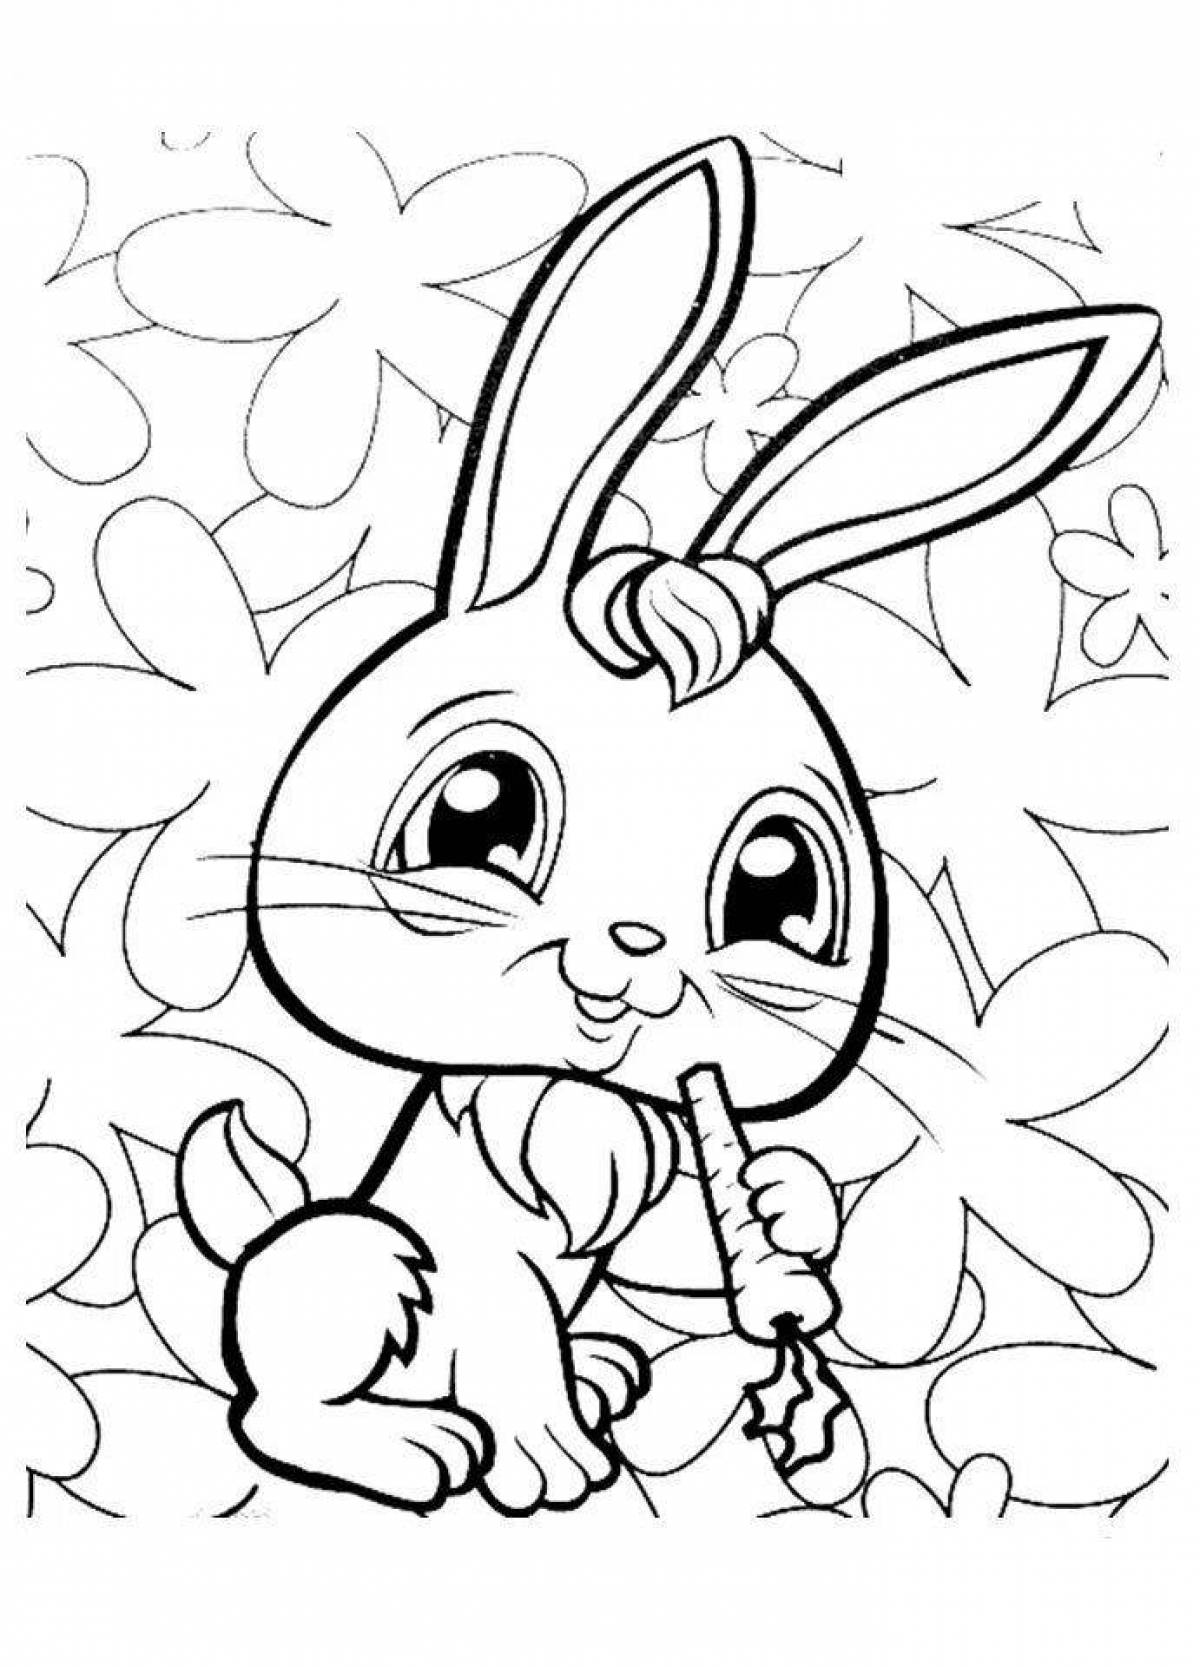 Snuggly coloring rabbit with carrots